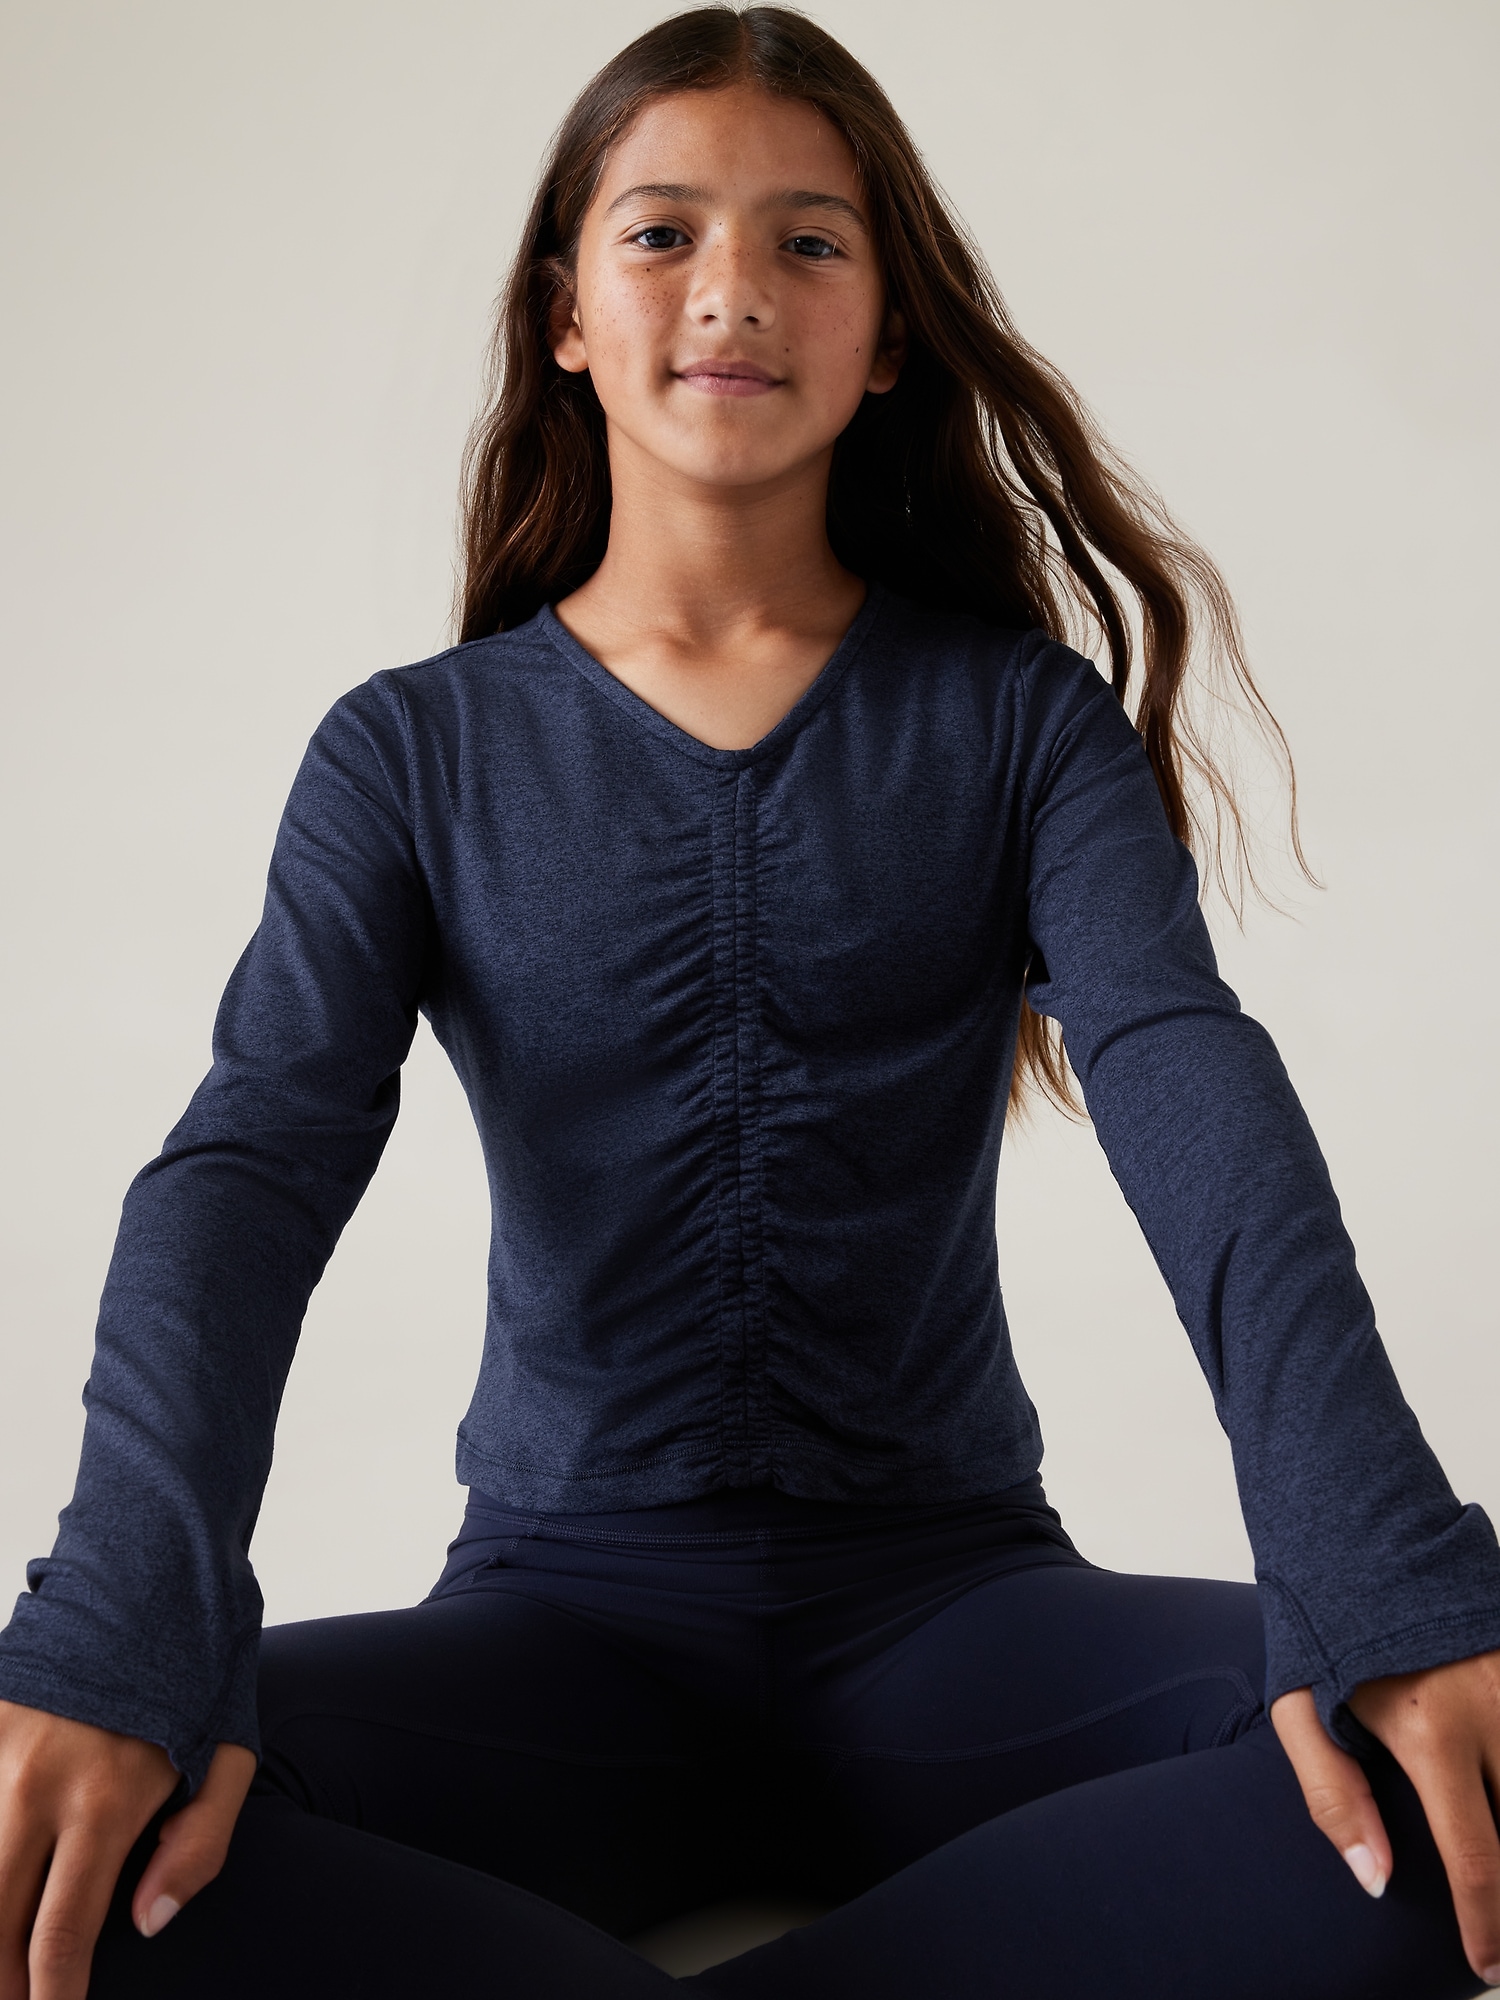 Athleta Girl Downtime Ruched Top